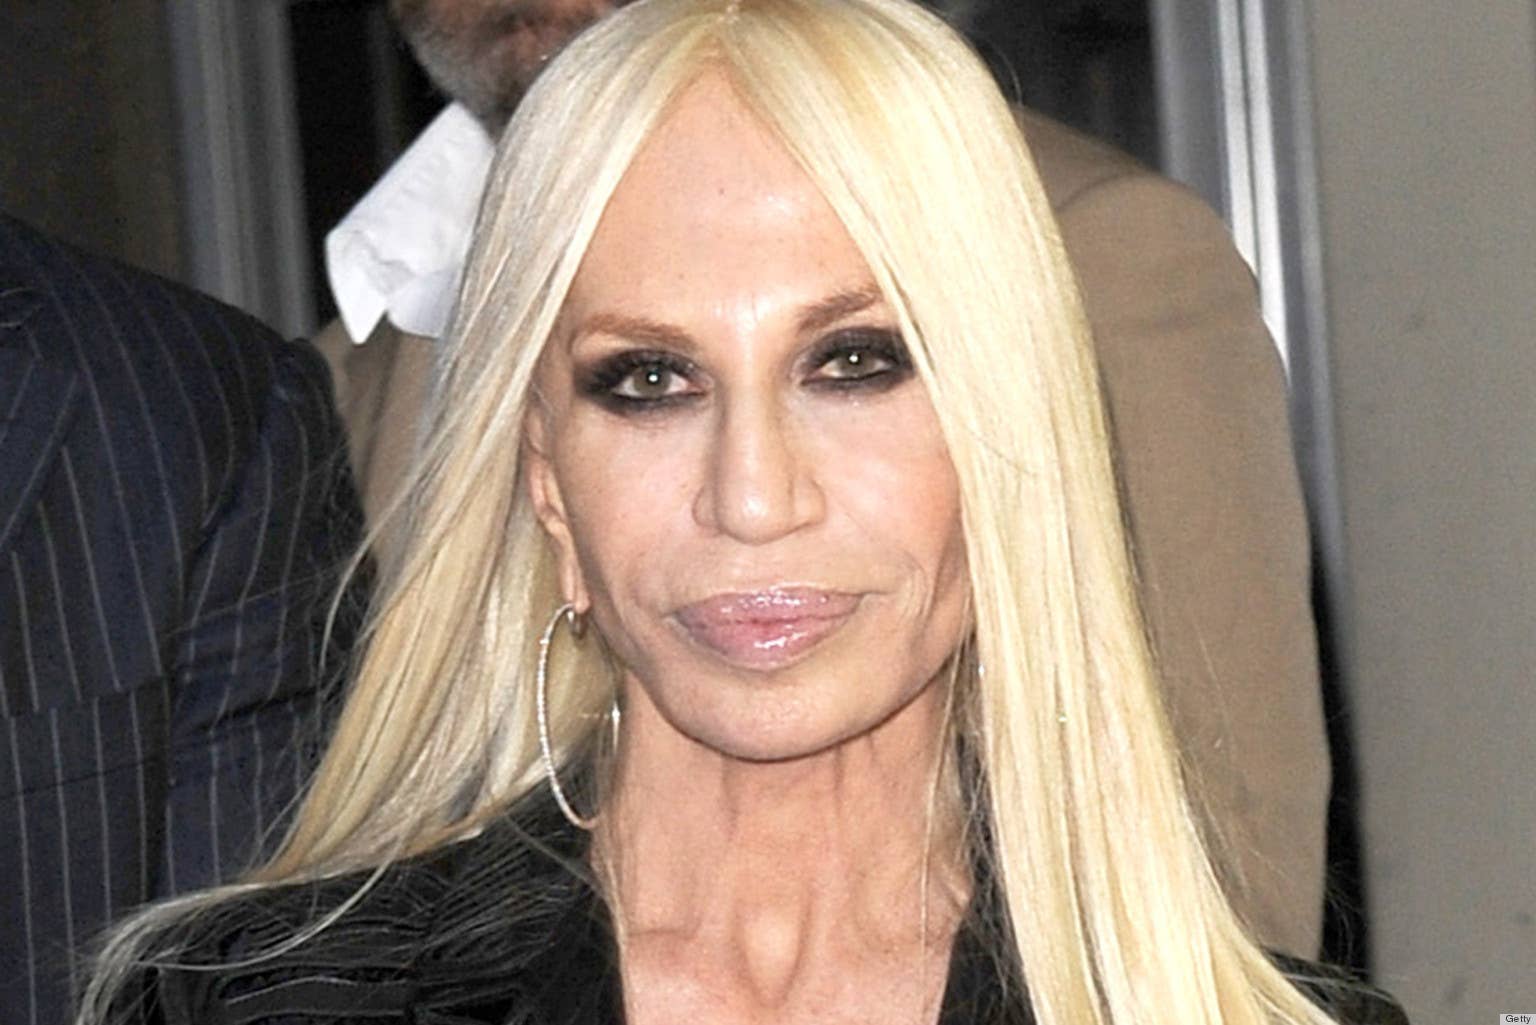 Donatella Versace launches her new Perfume, Versace, exclusively